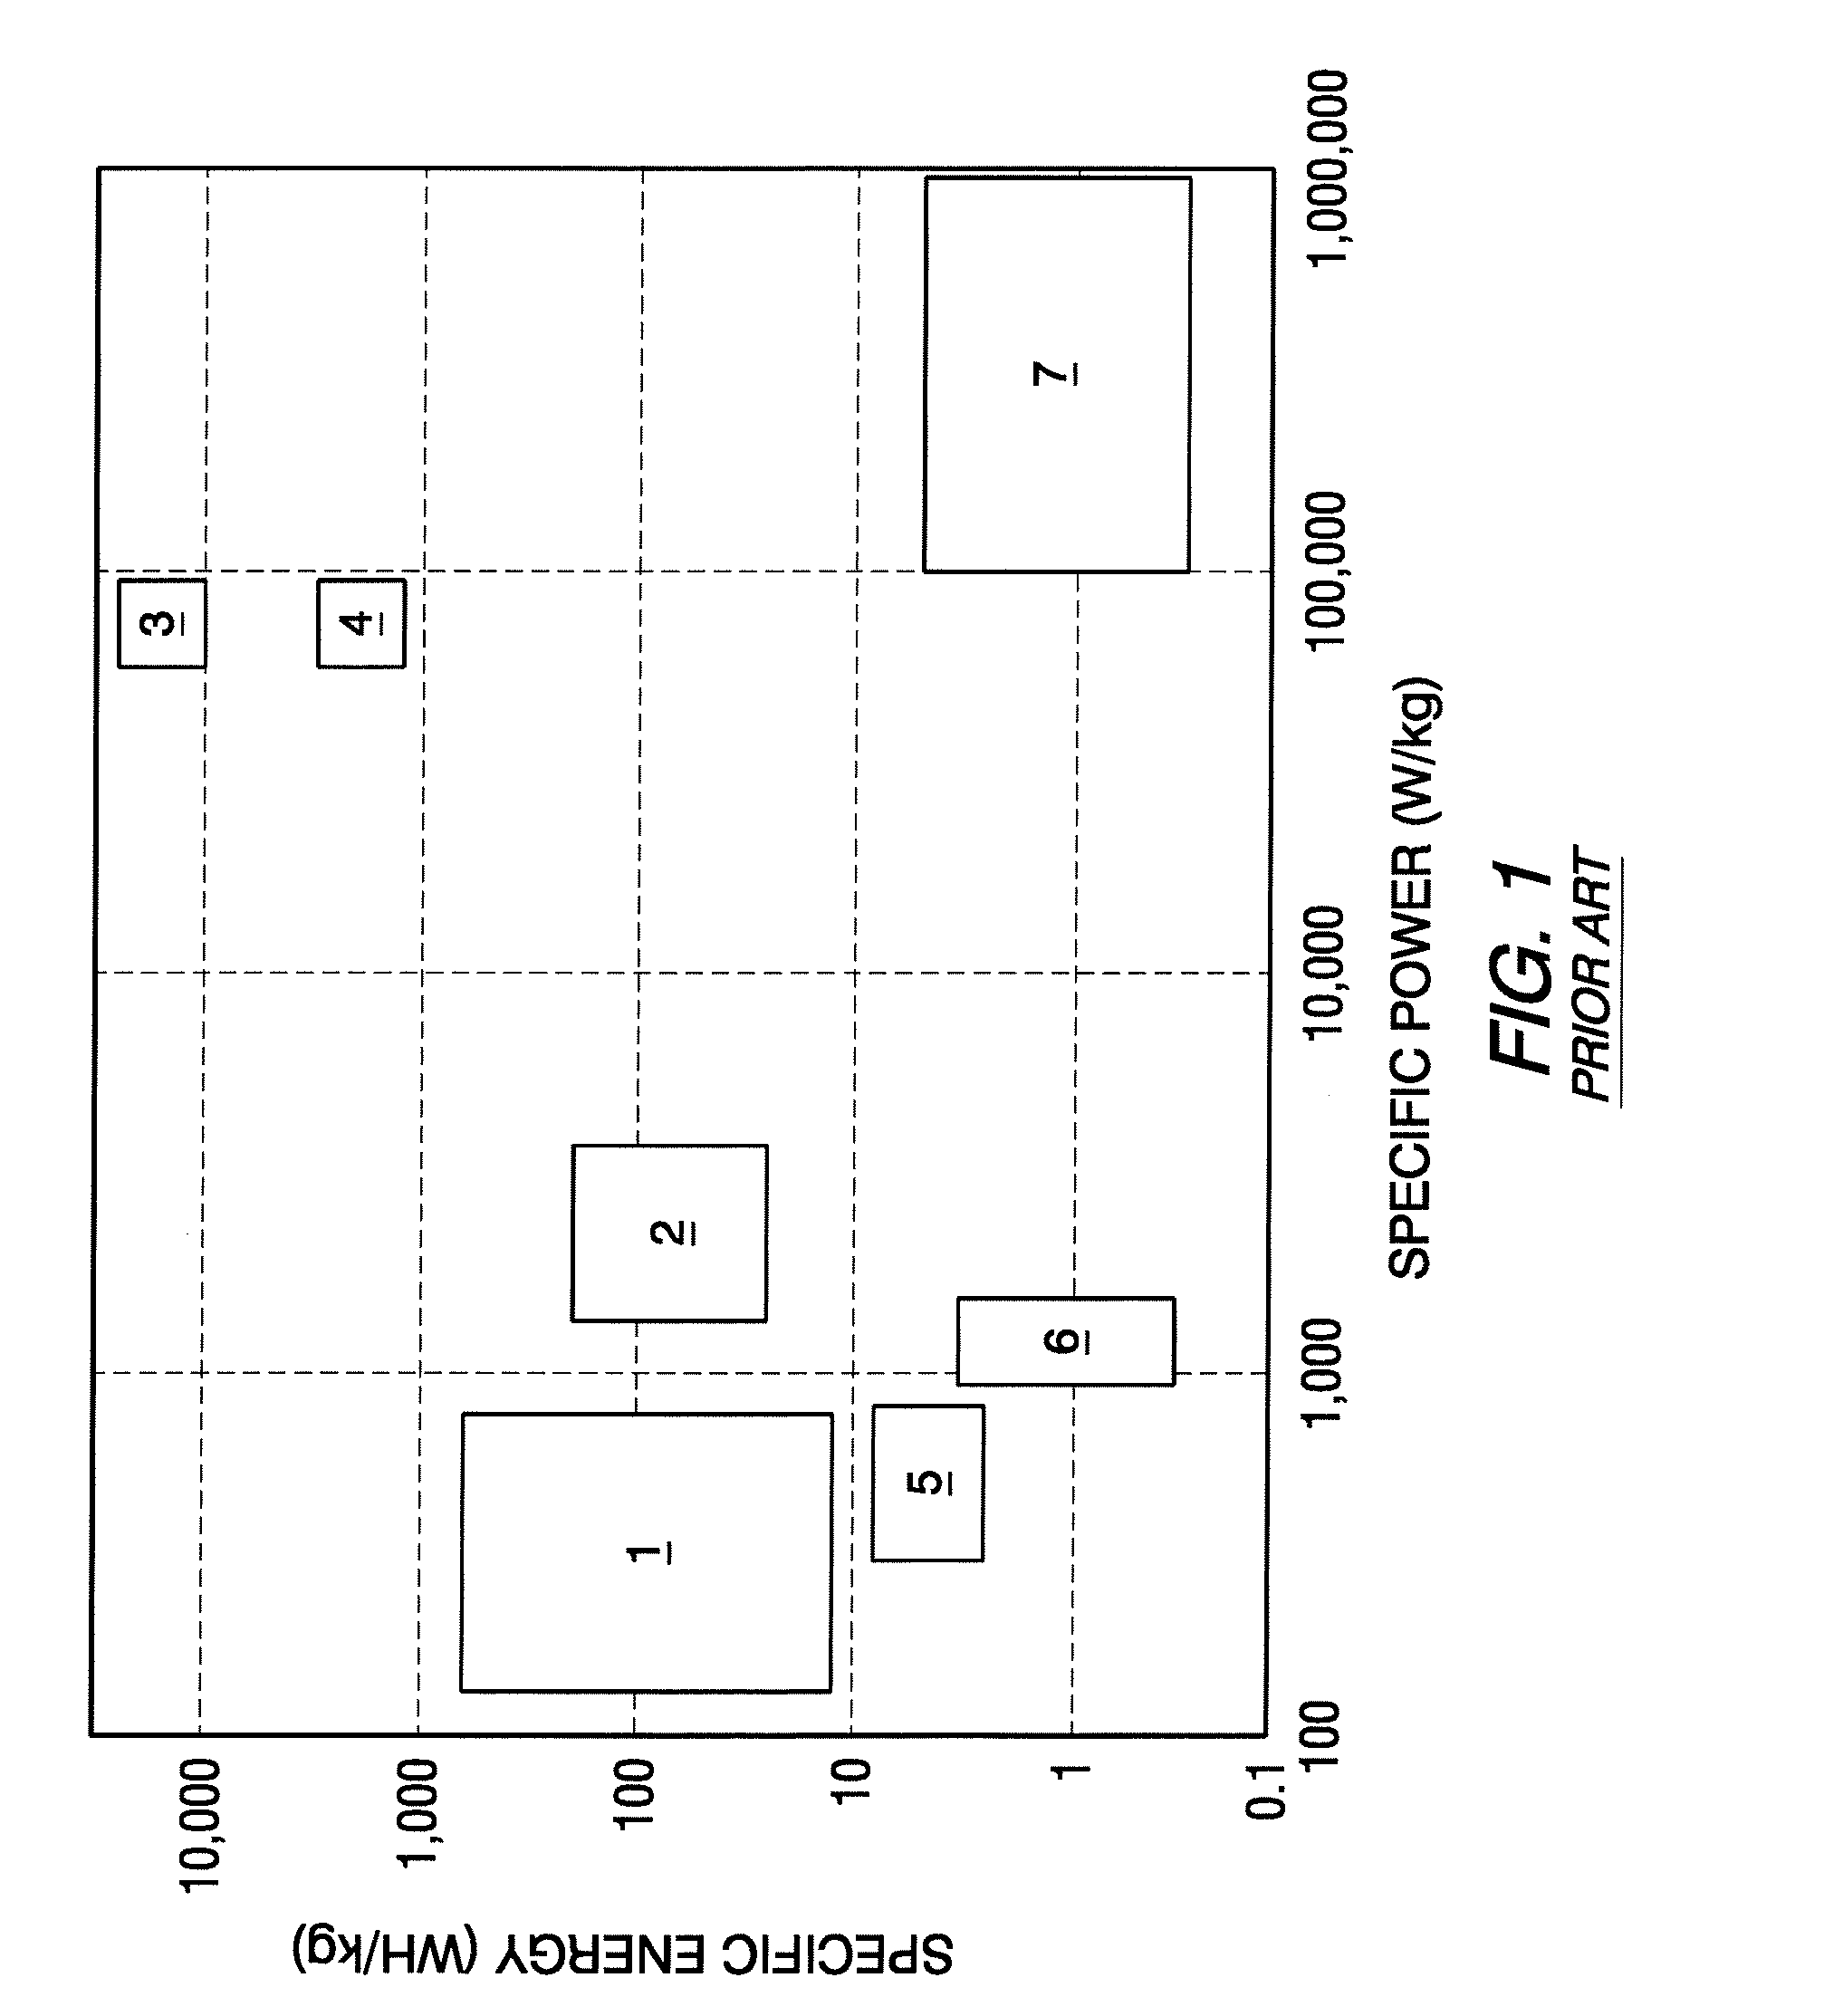 Method for operating a propulsion system of a watercraft